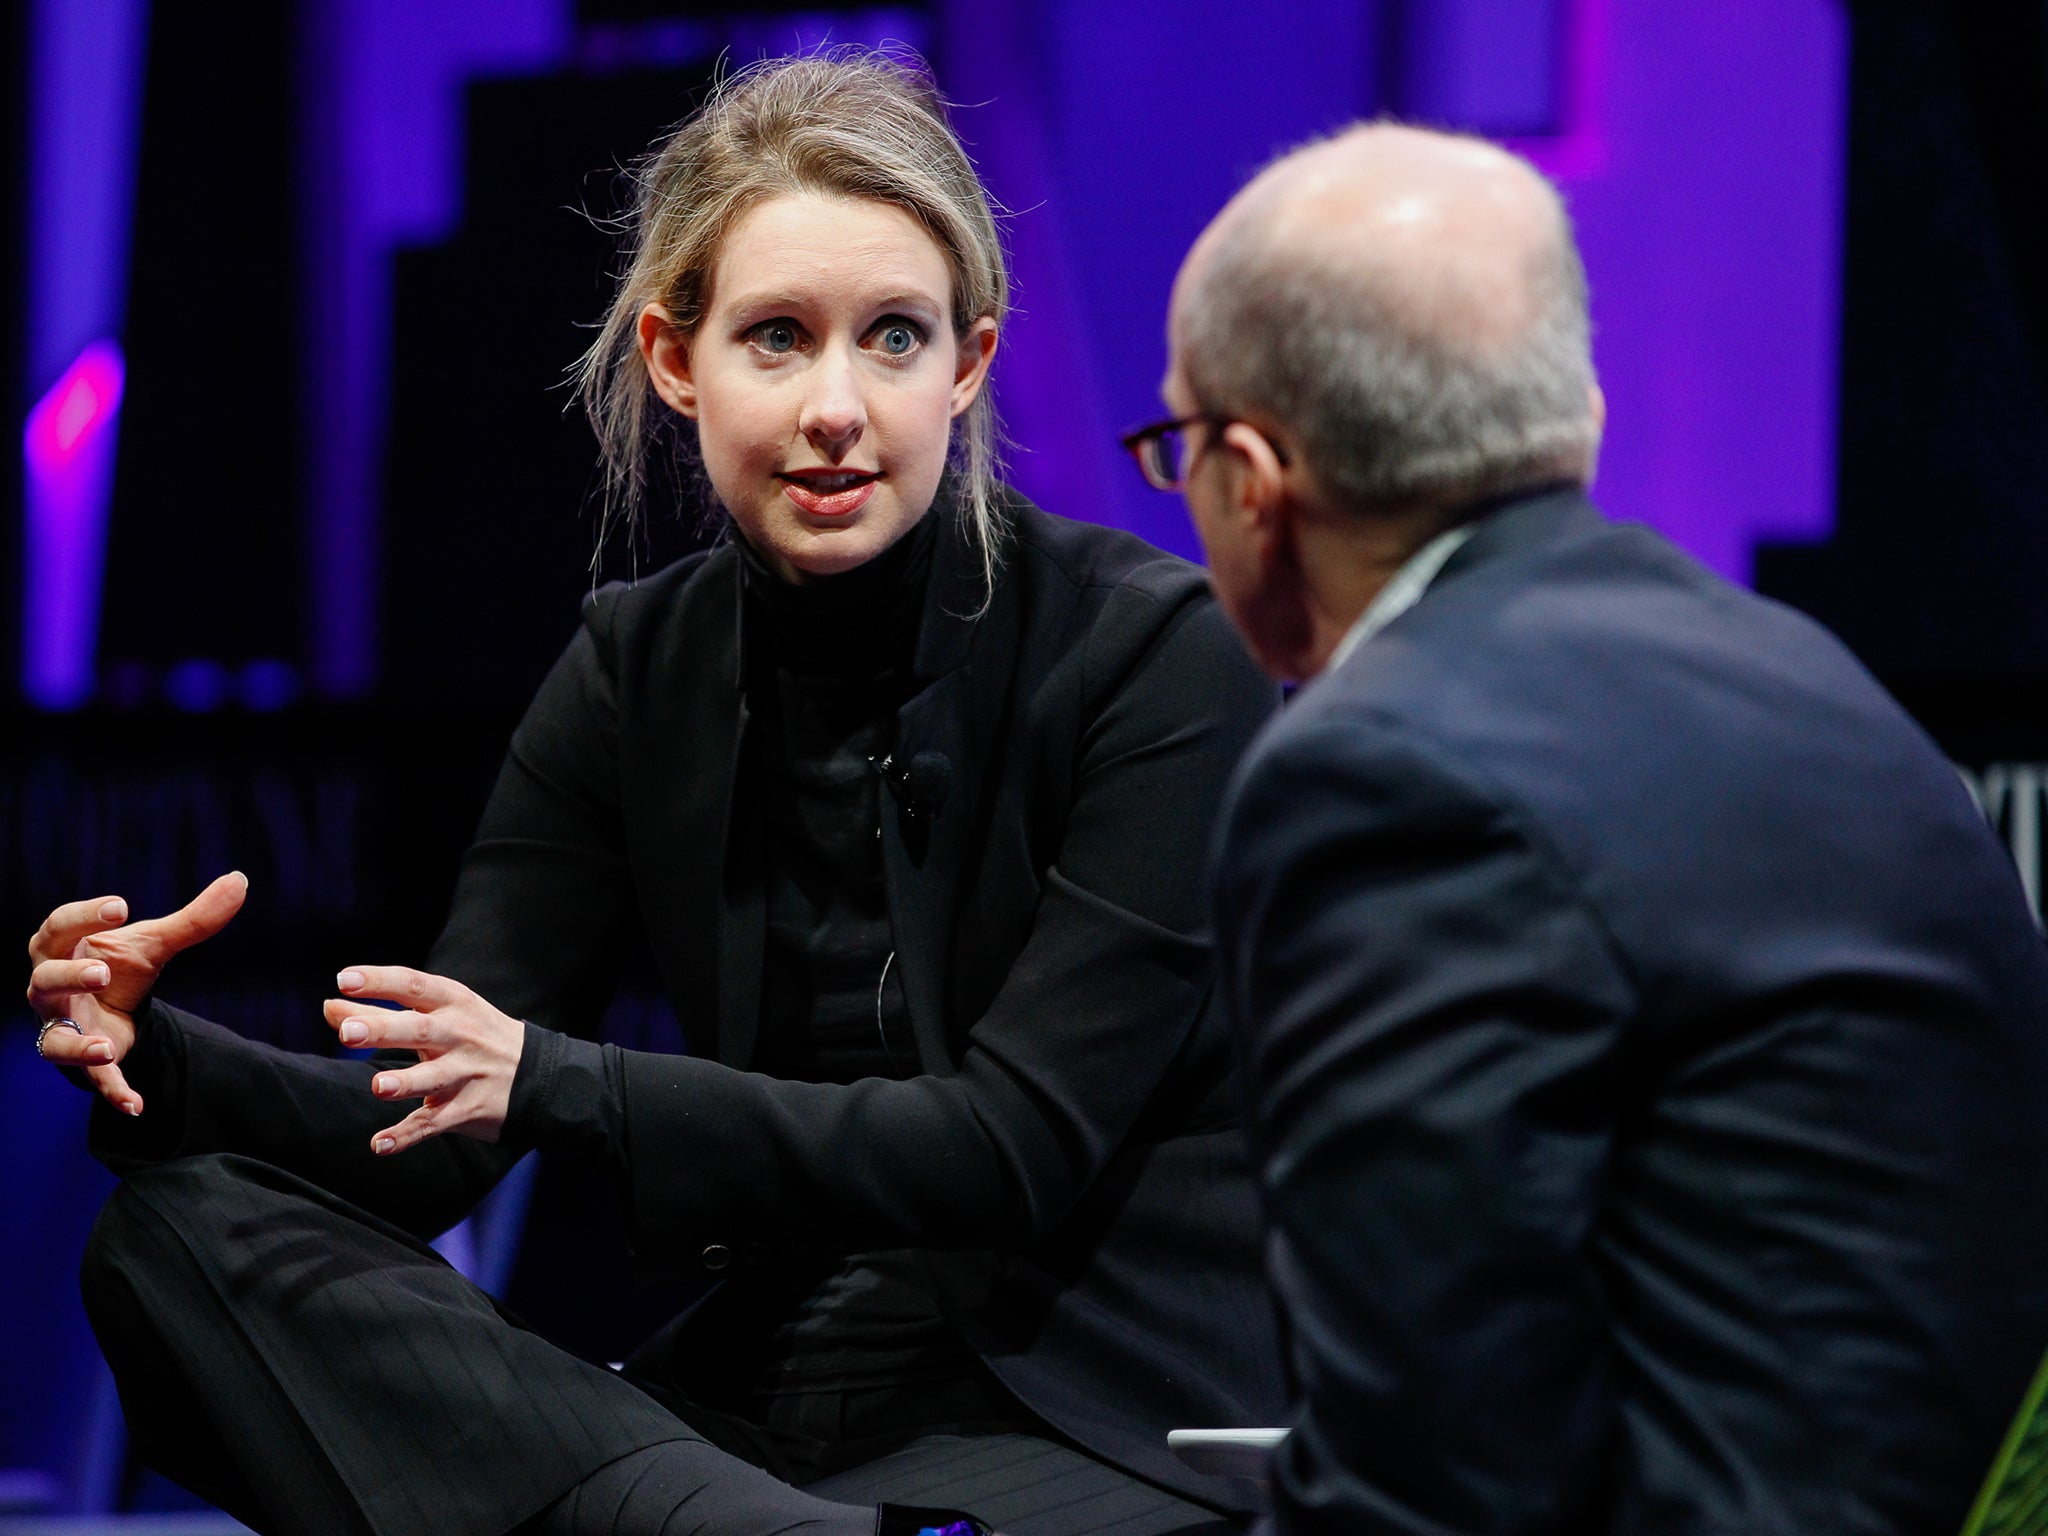 Holmes founded healthcare-technology company Theranos as a sophomore at Stanford.